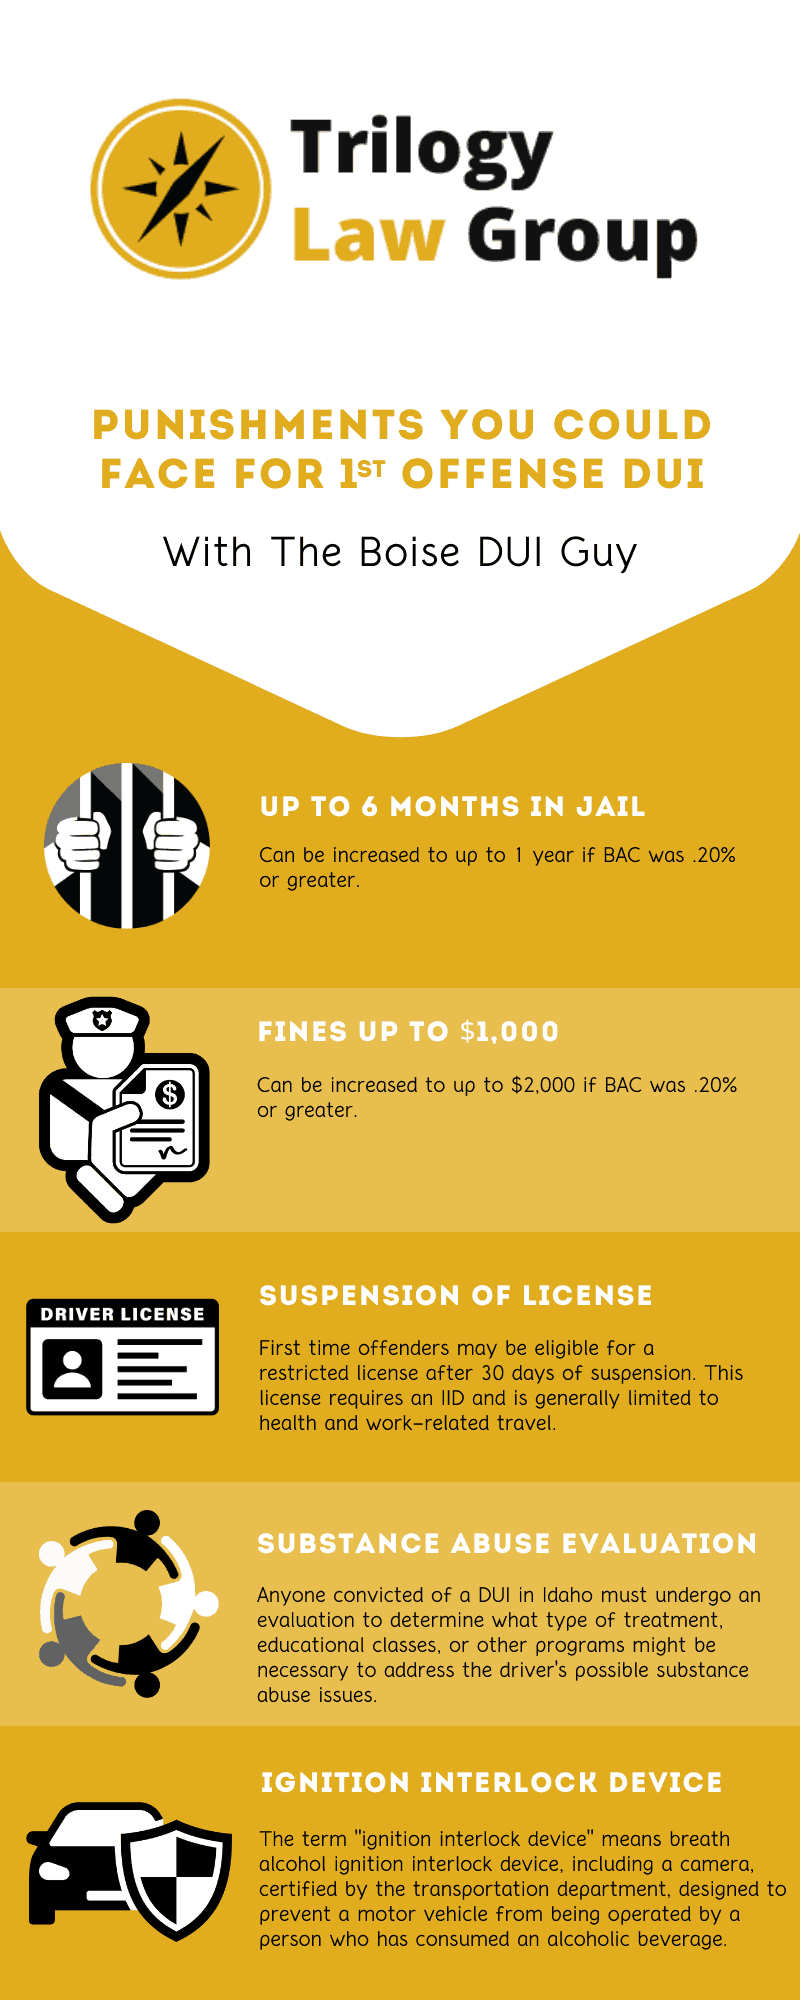 Punishments You Could Face For 1st Offense DUI